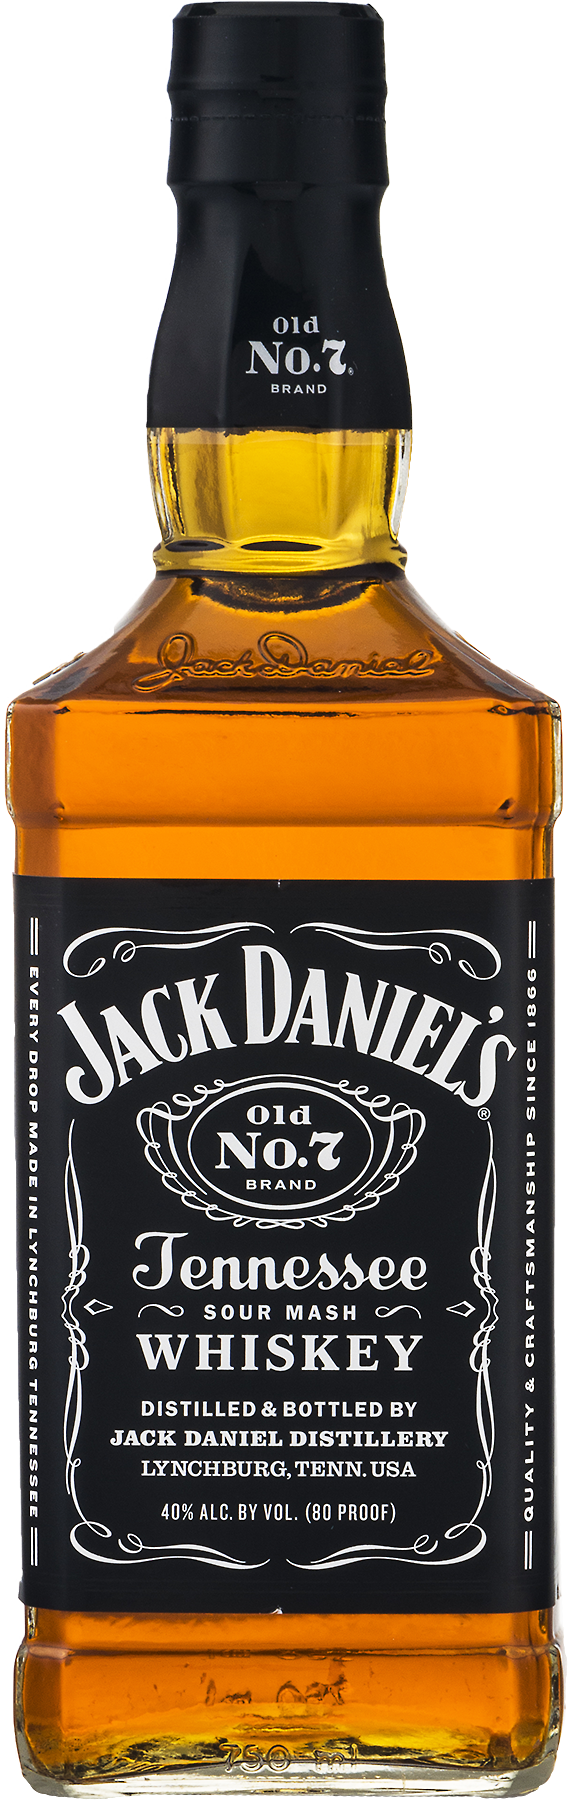 Jack Daniels Old No.7 Tennessee Whiskey 1L with Tin Can.